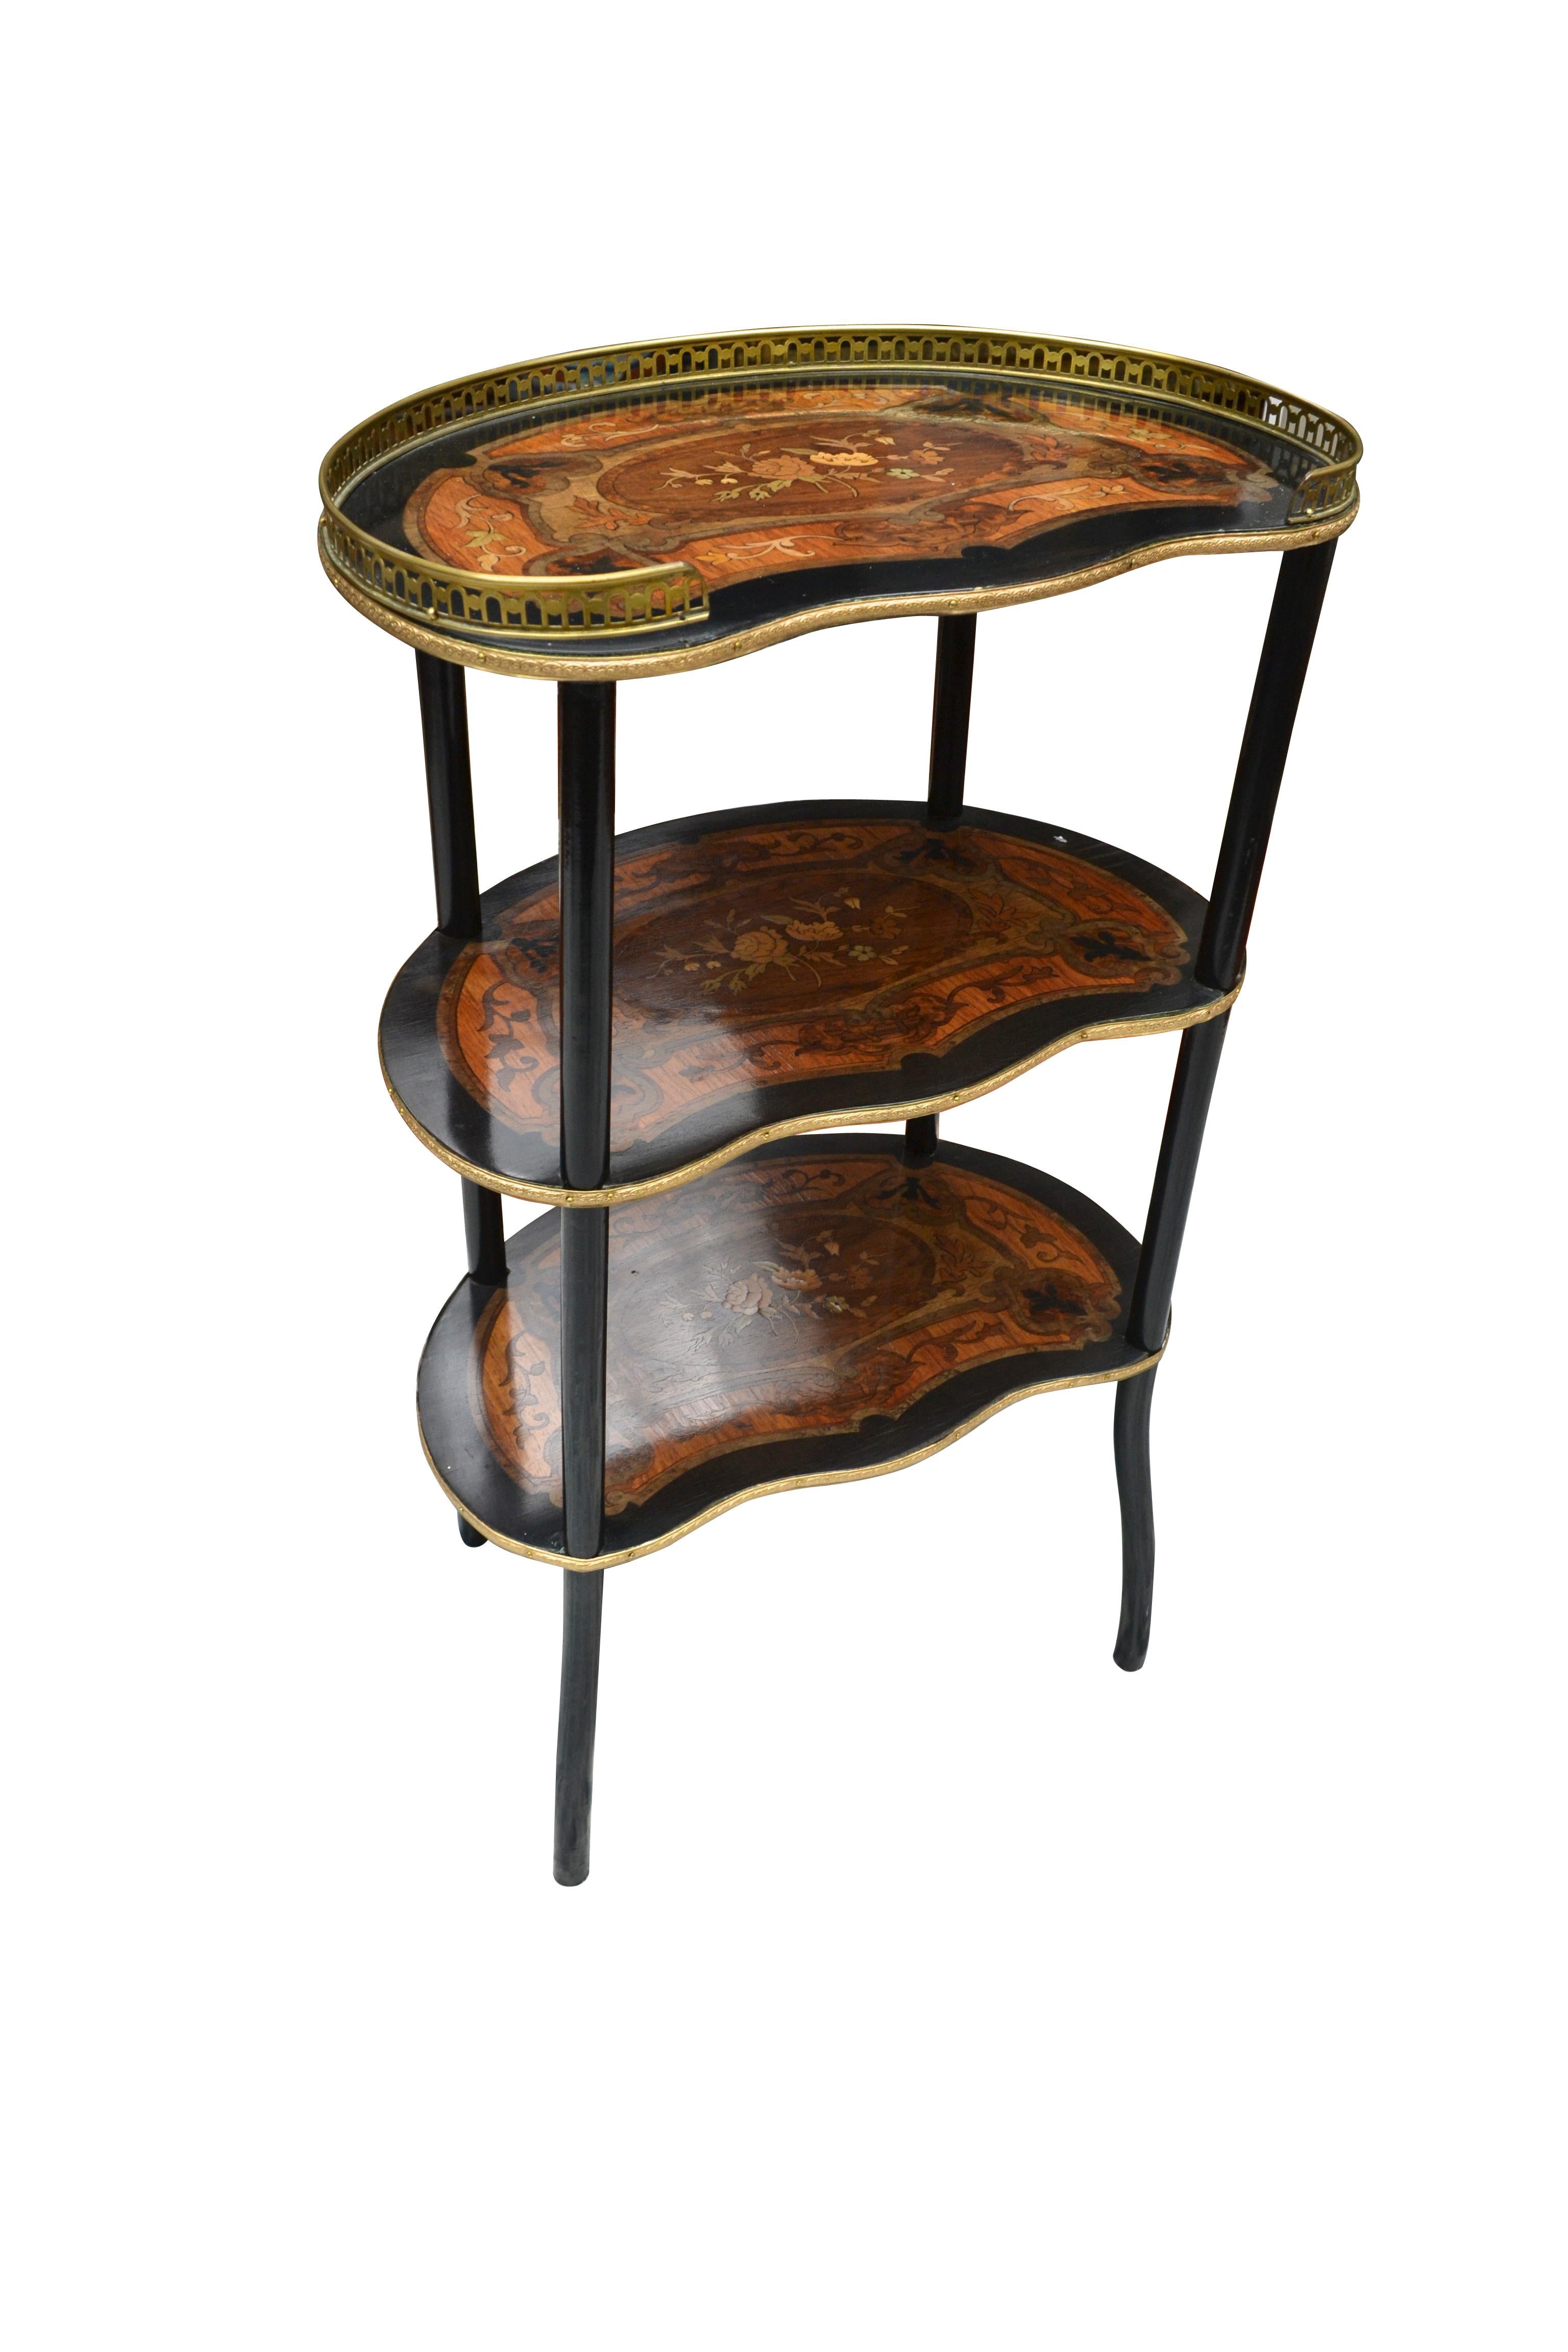 19th Century Three-Tiered Napoleon III French Marquetry Kidney shaped Desert Table